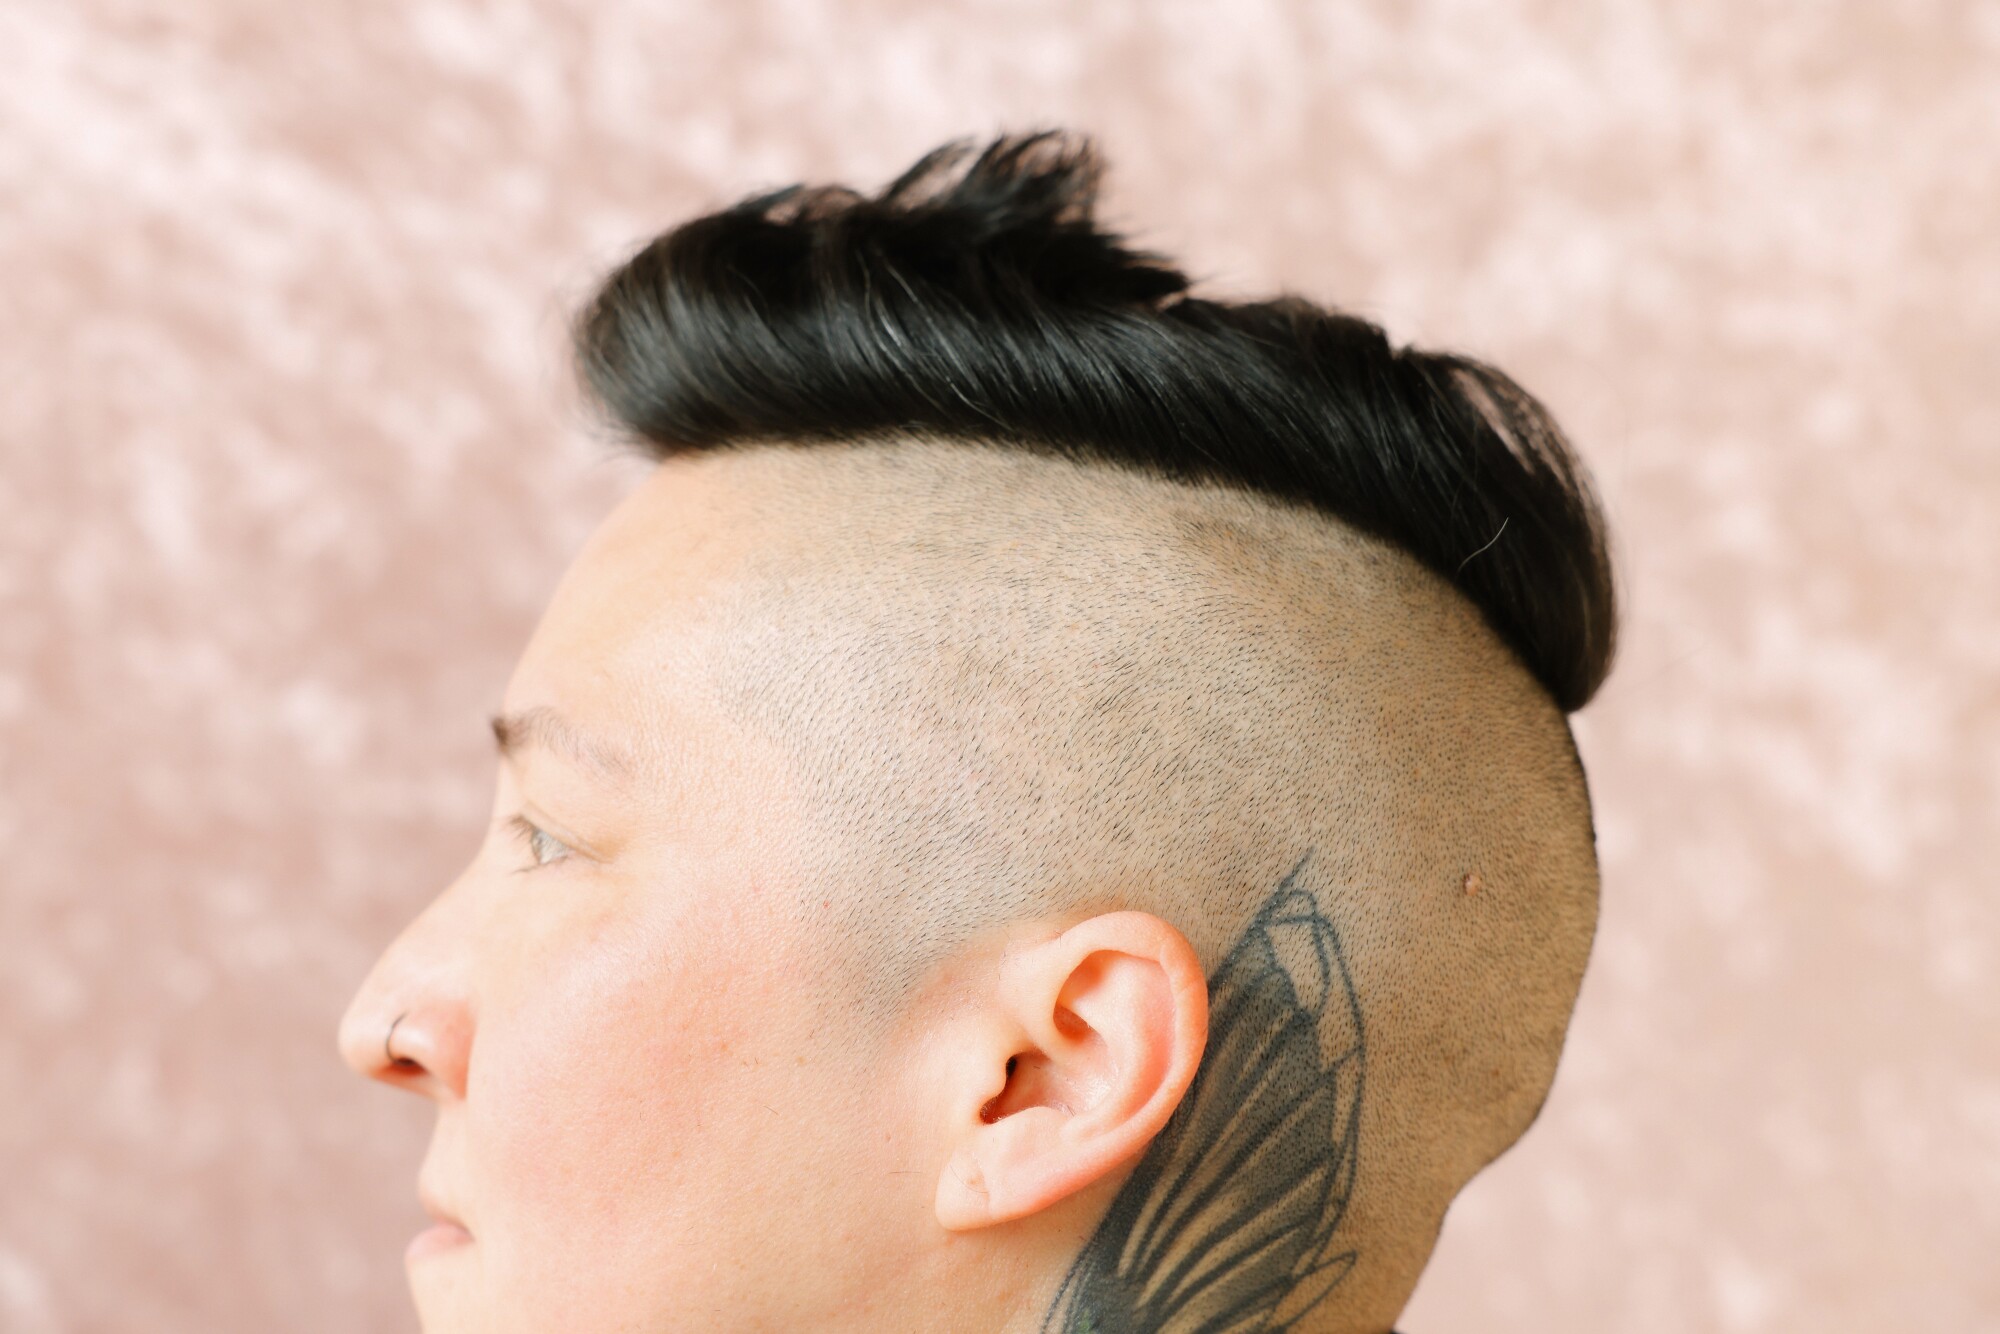 The side of a person's head has shaved hair, long hair on top and a tattoo behind the ear